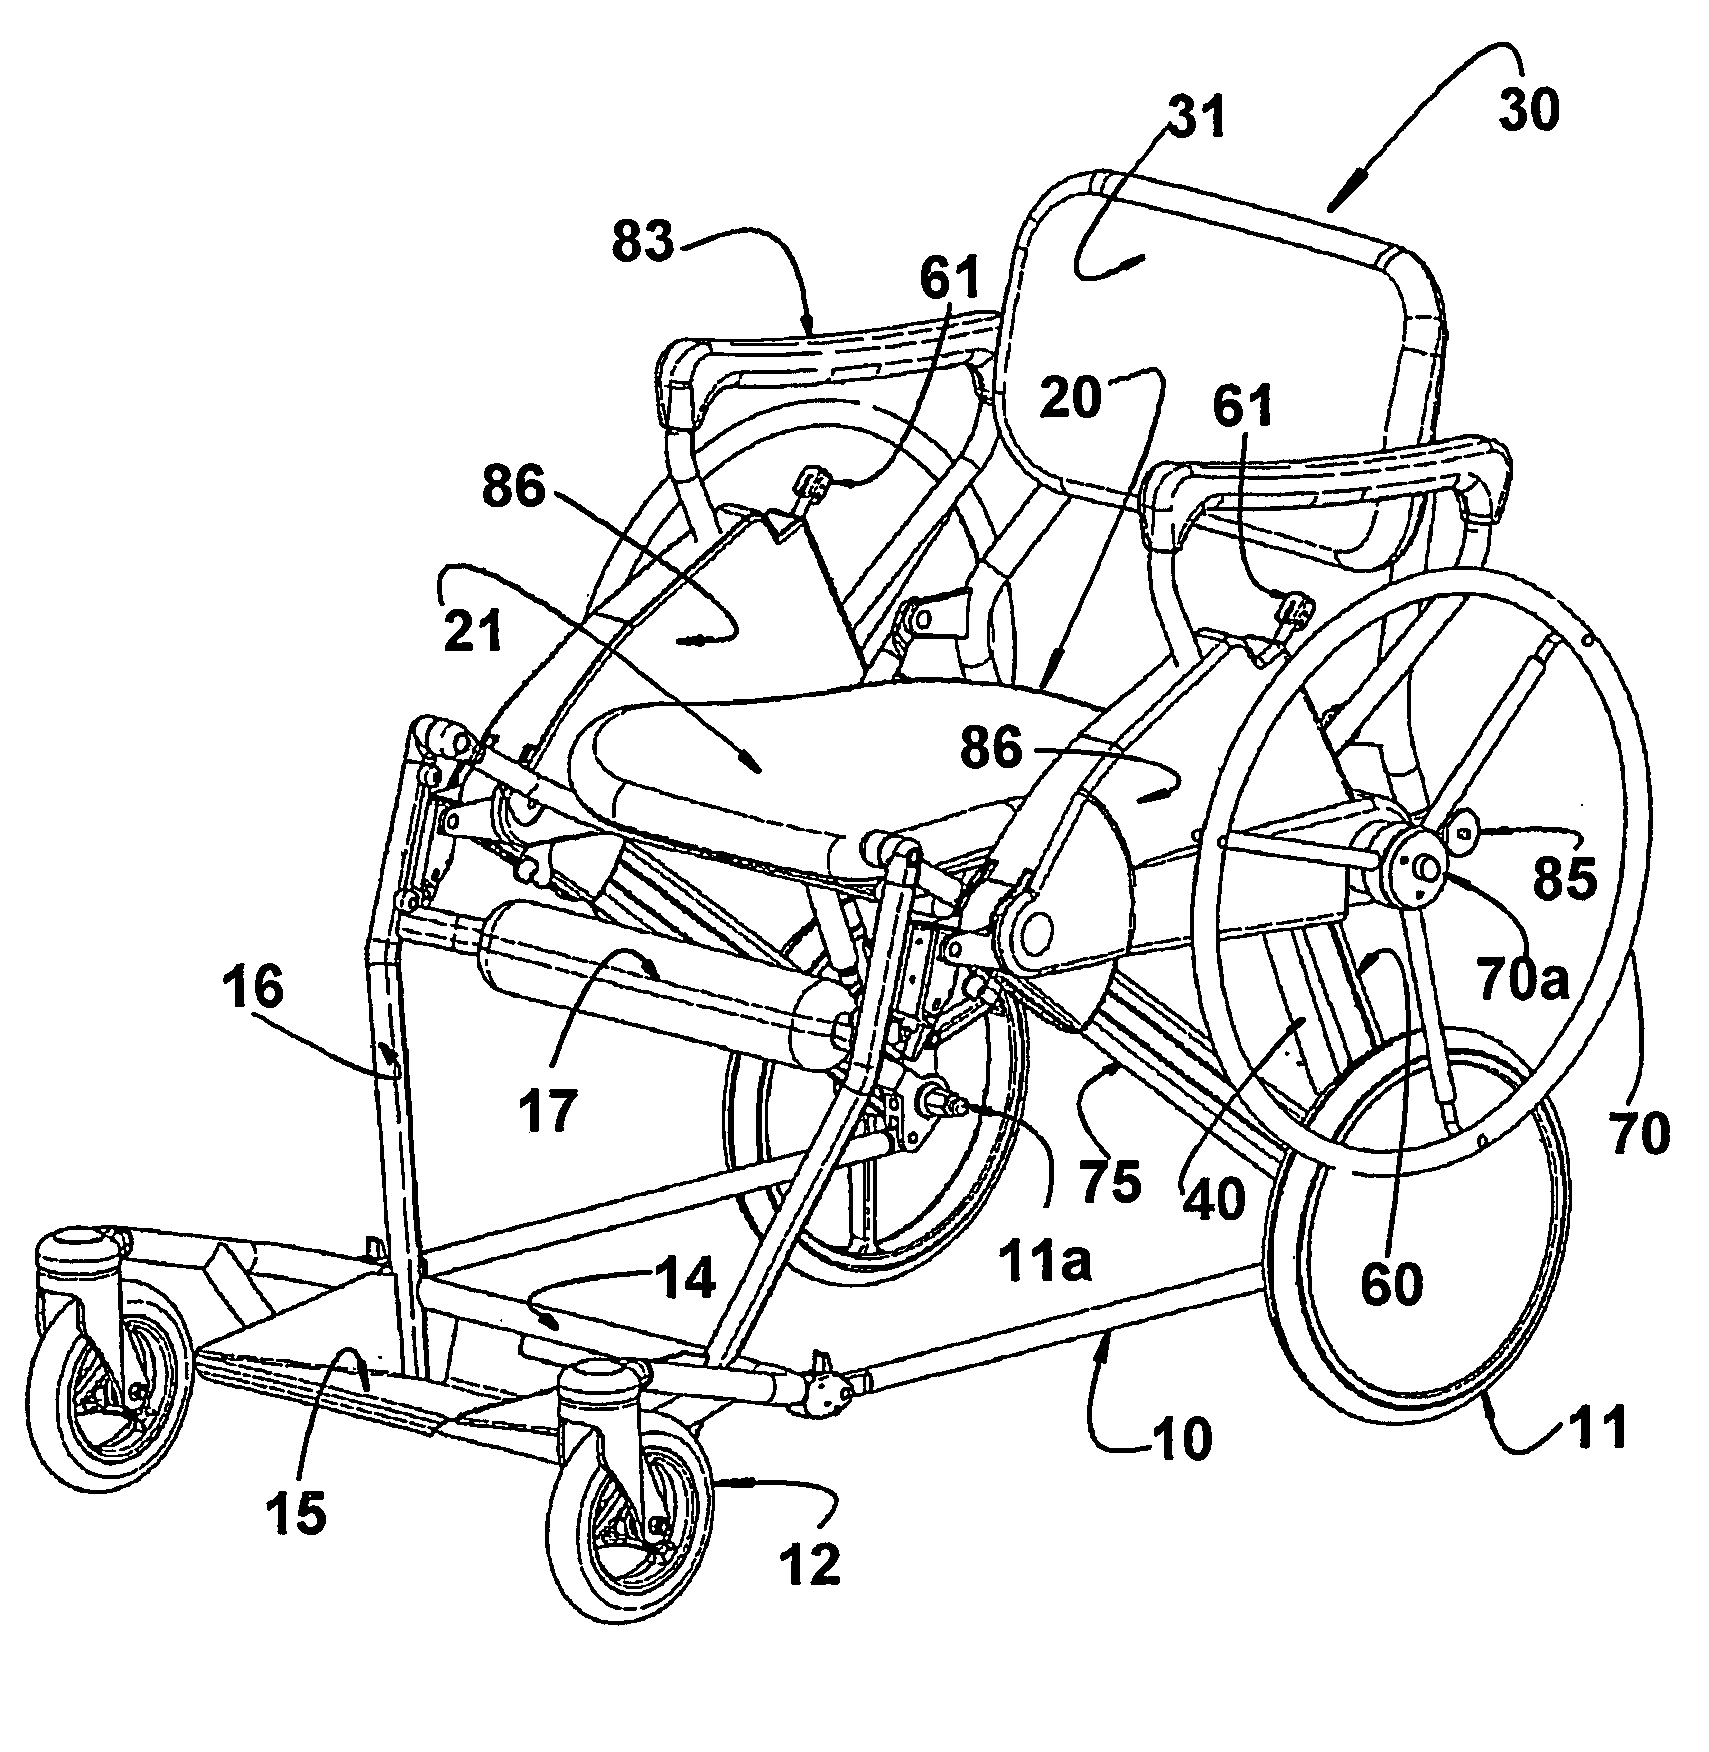 Locomotion device for physically disabled persons